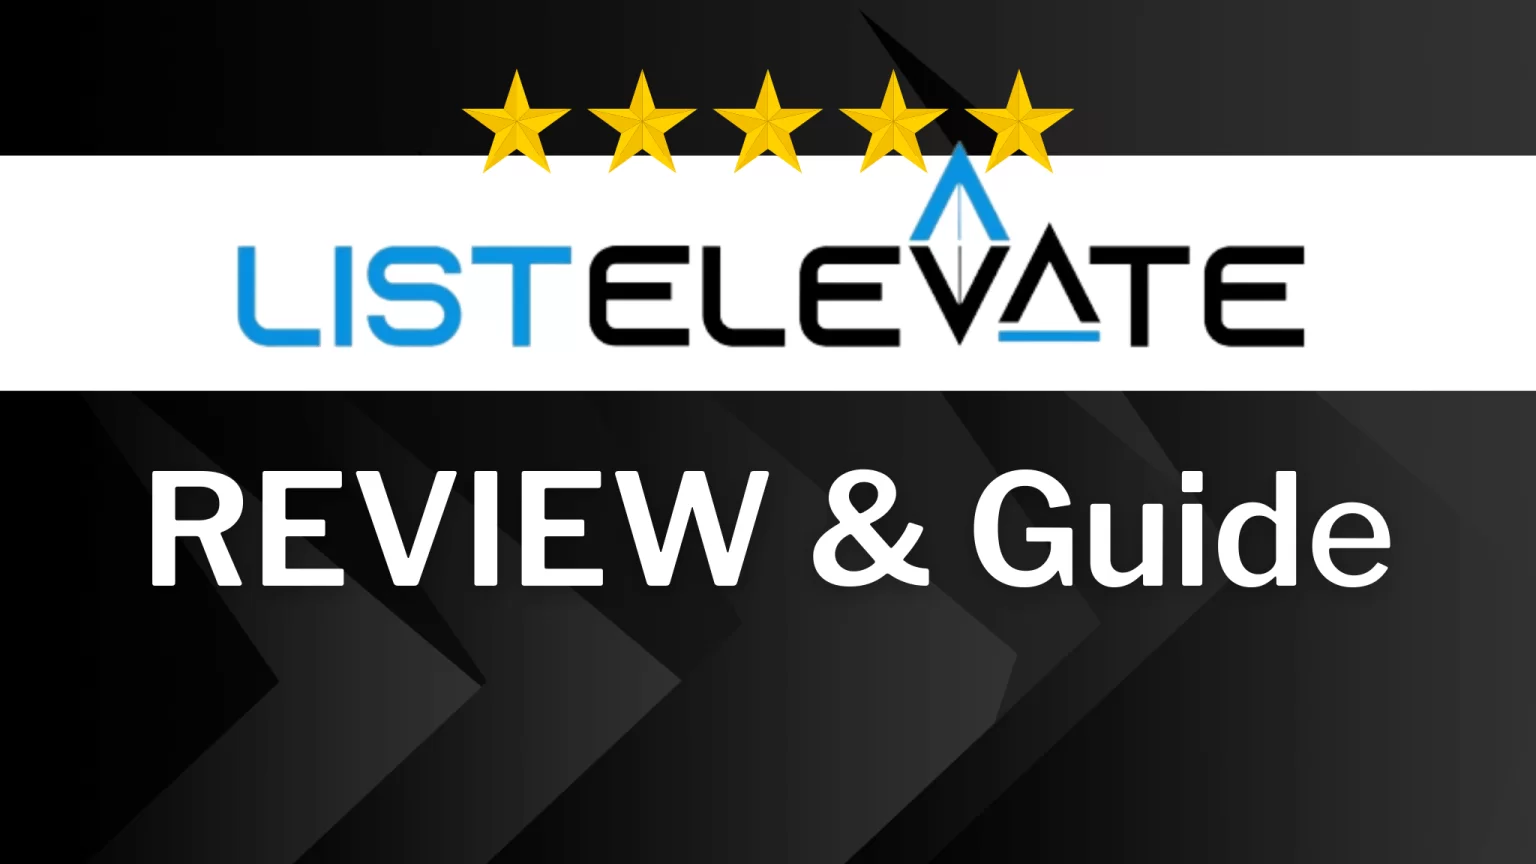 List Elevate Review